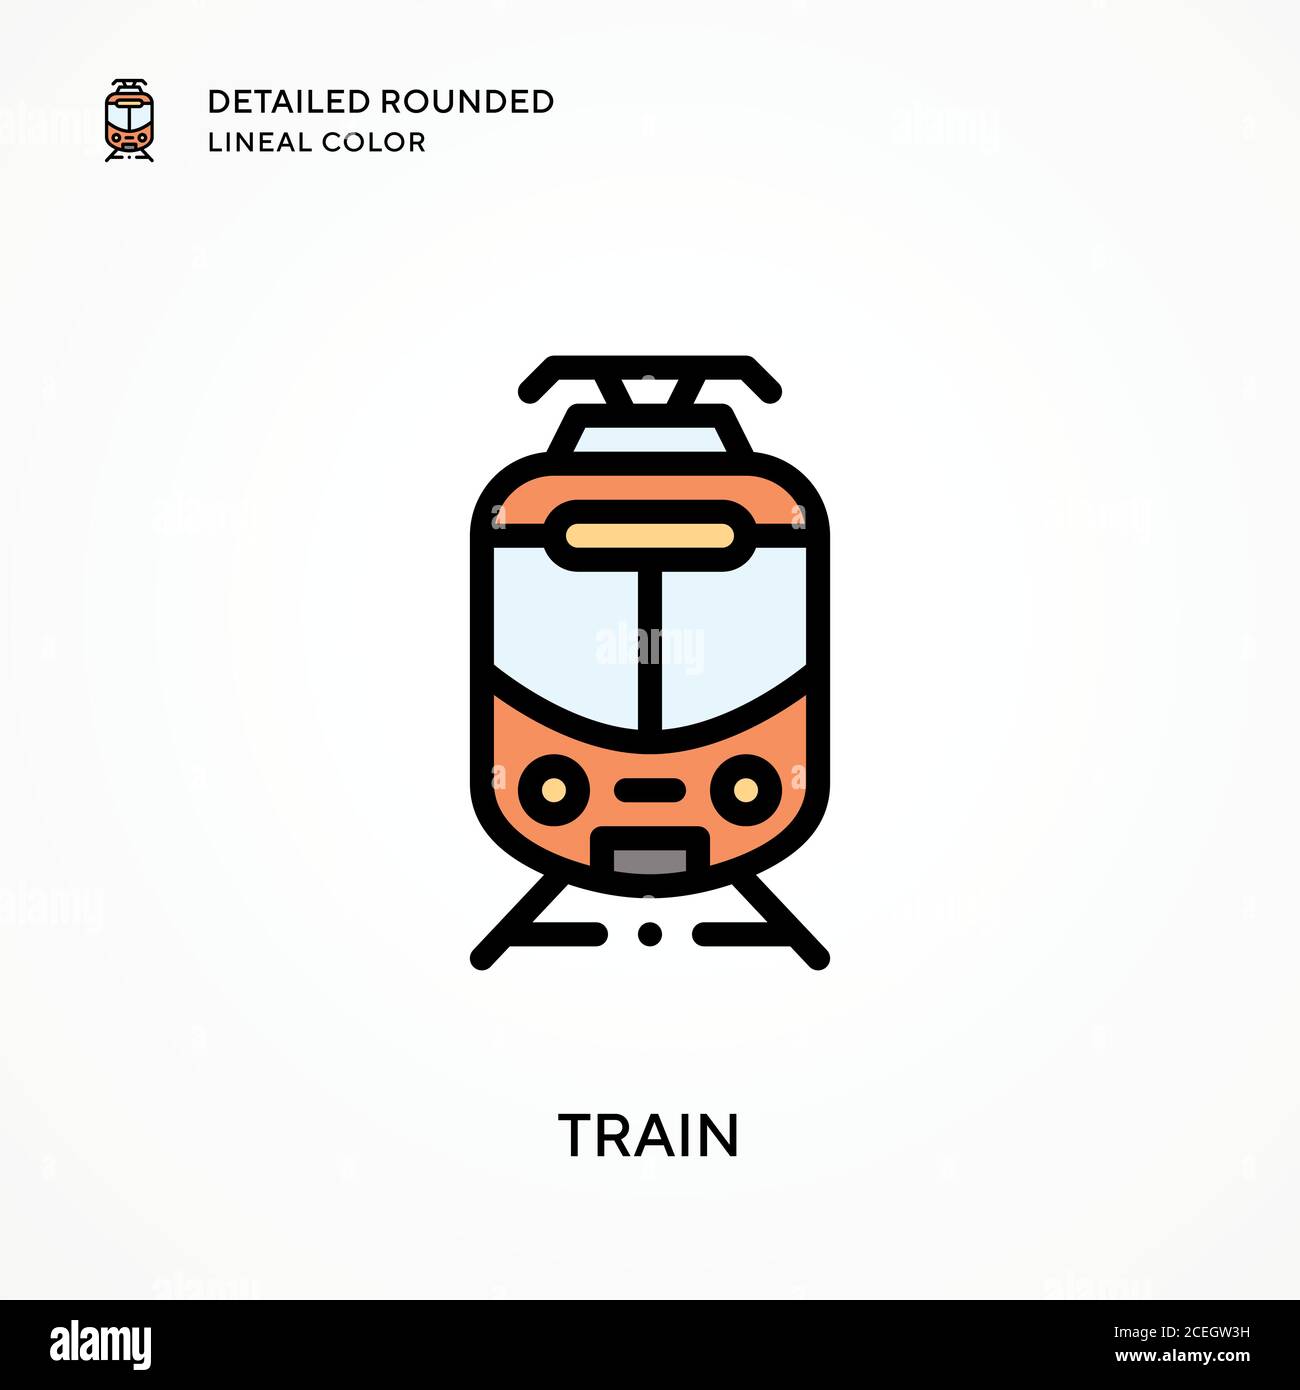 Train detailed rounded lineal color. Modern vector illustration concepts. Easy to edit and customize. Stock Vector